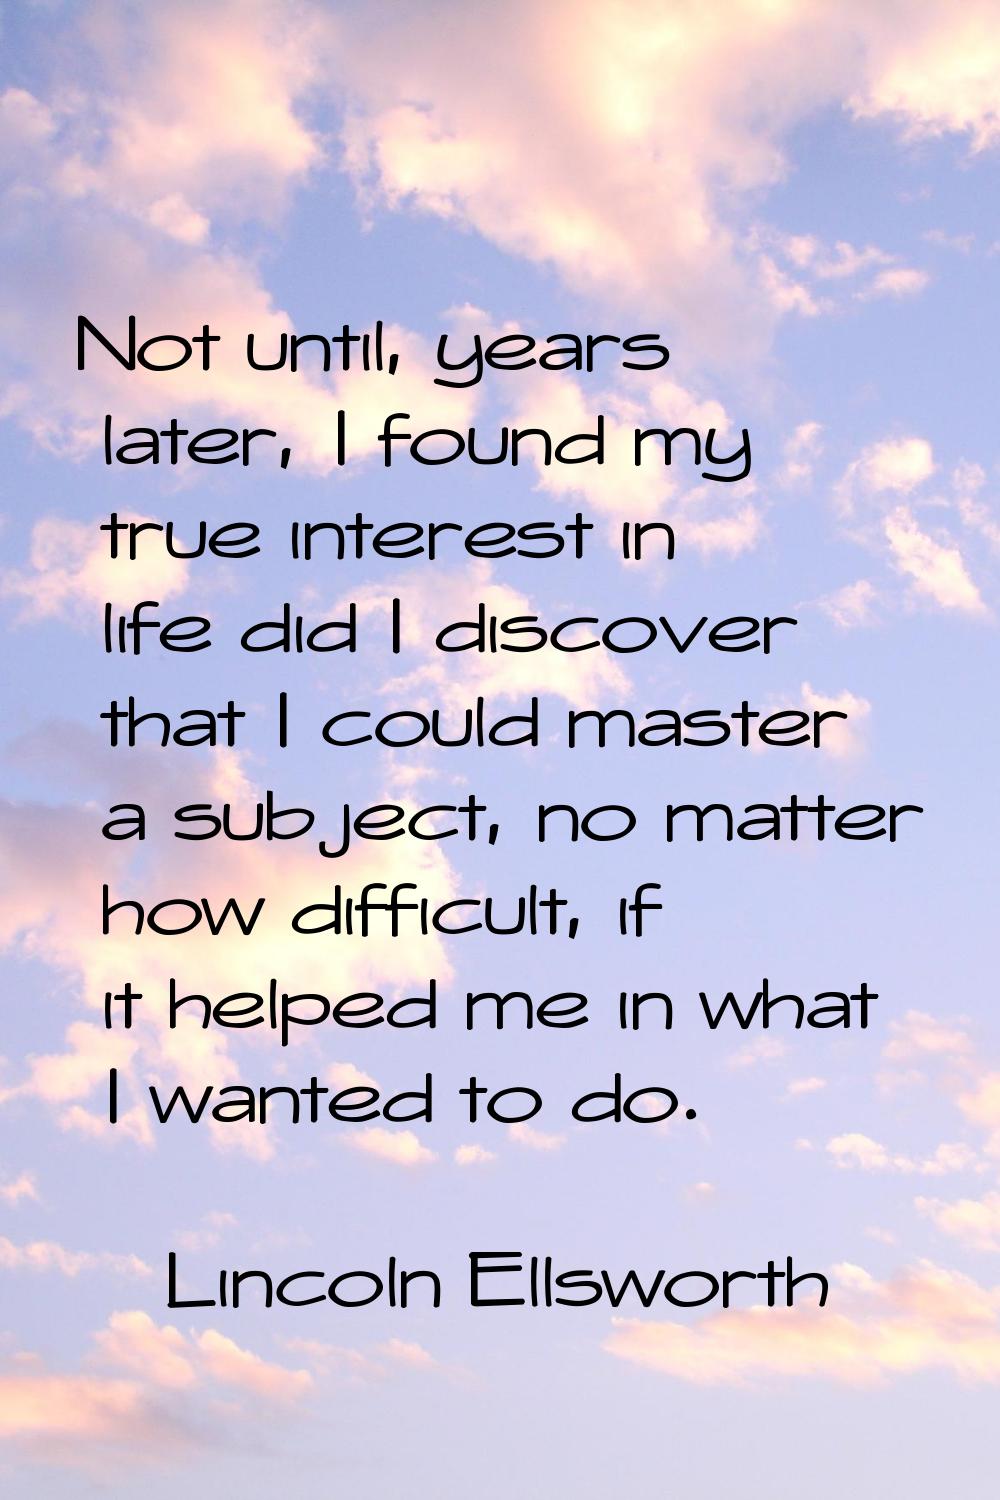 Not until, years later, I found my true interest in life did I discover that I could master a subje